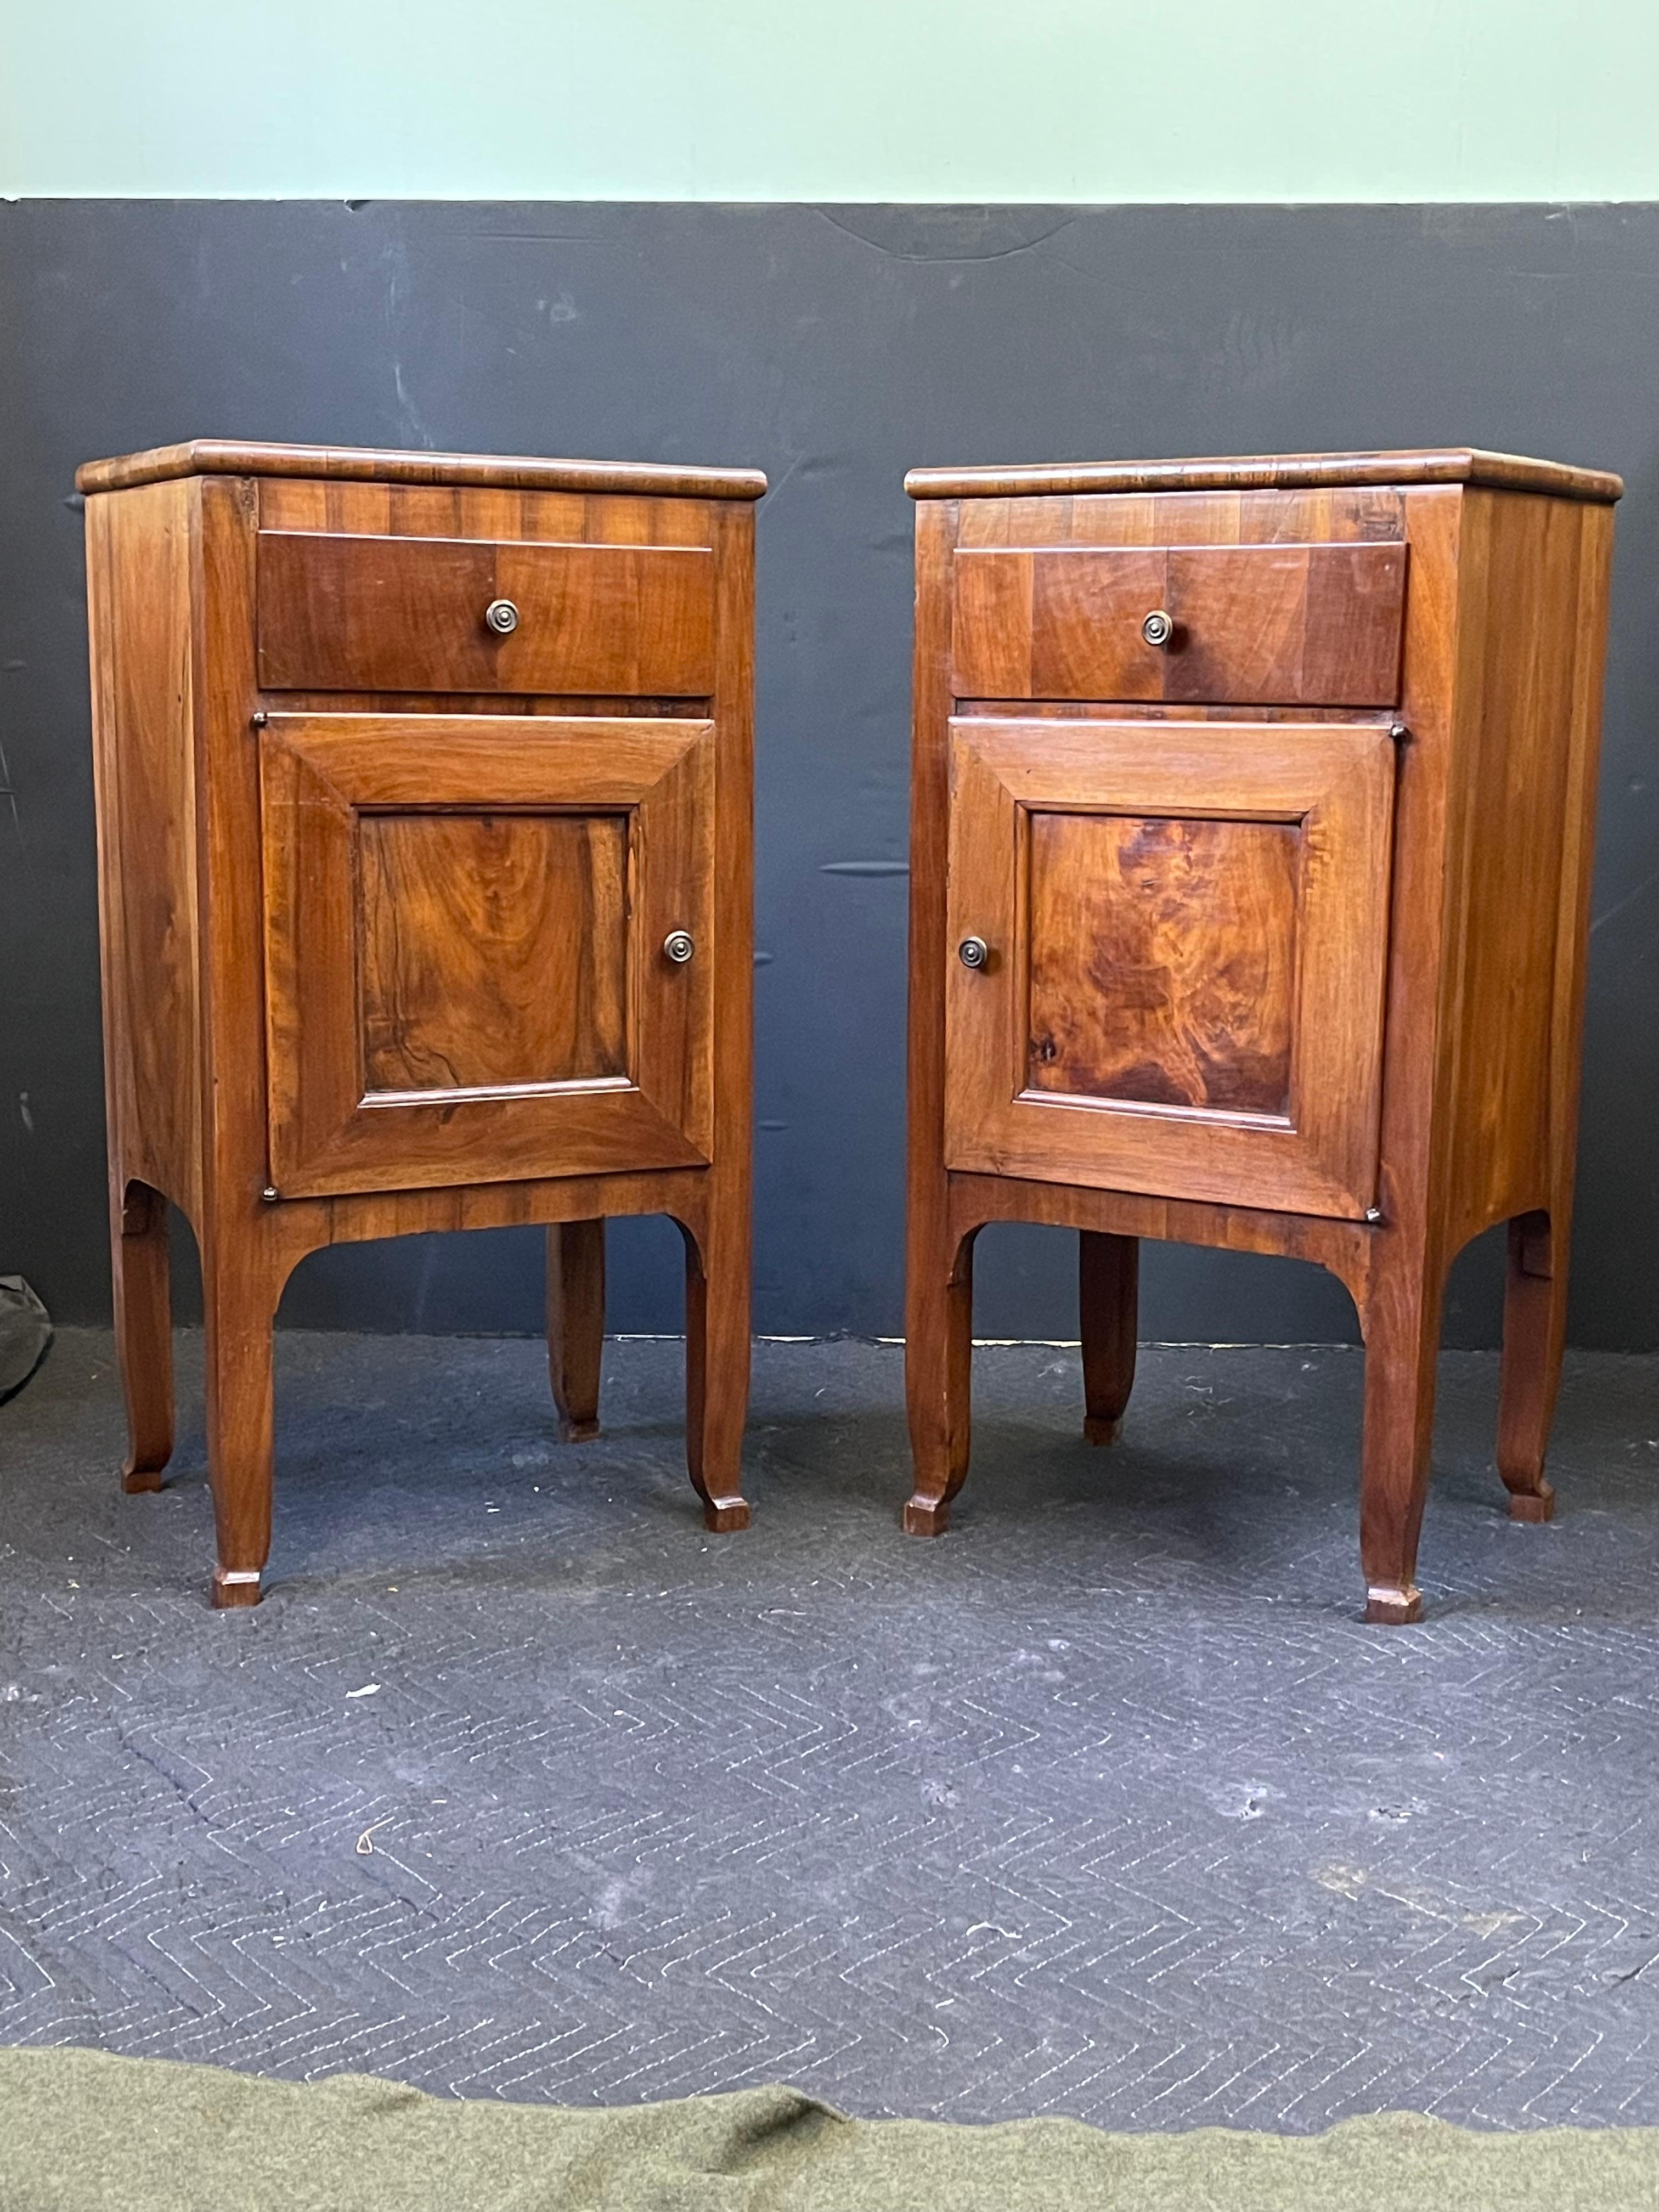 A 20th Century Italian Neoclassical facing pair of side cabinets or nightstands constructed of walnut. Each antique cabinet has a wood top with rounded edges, a classic case designed with clean lines, and a drawer over an enclosed cabinet with a